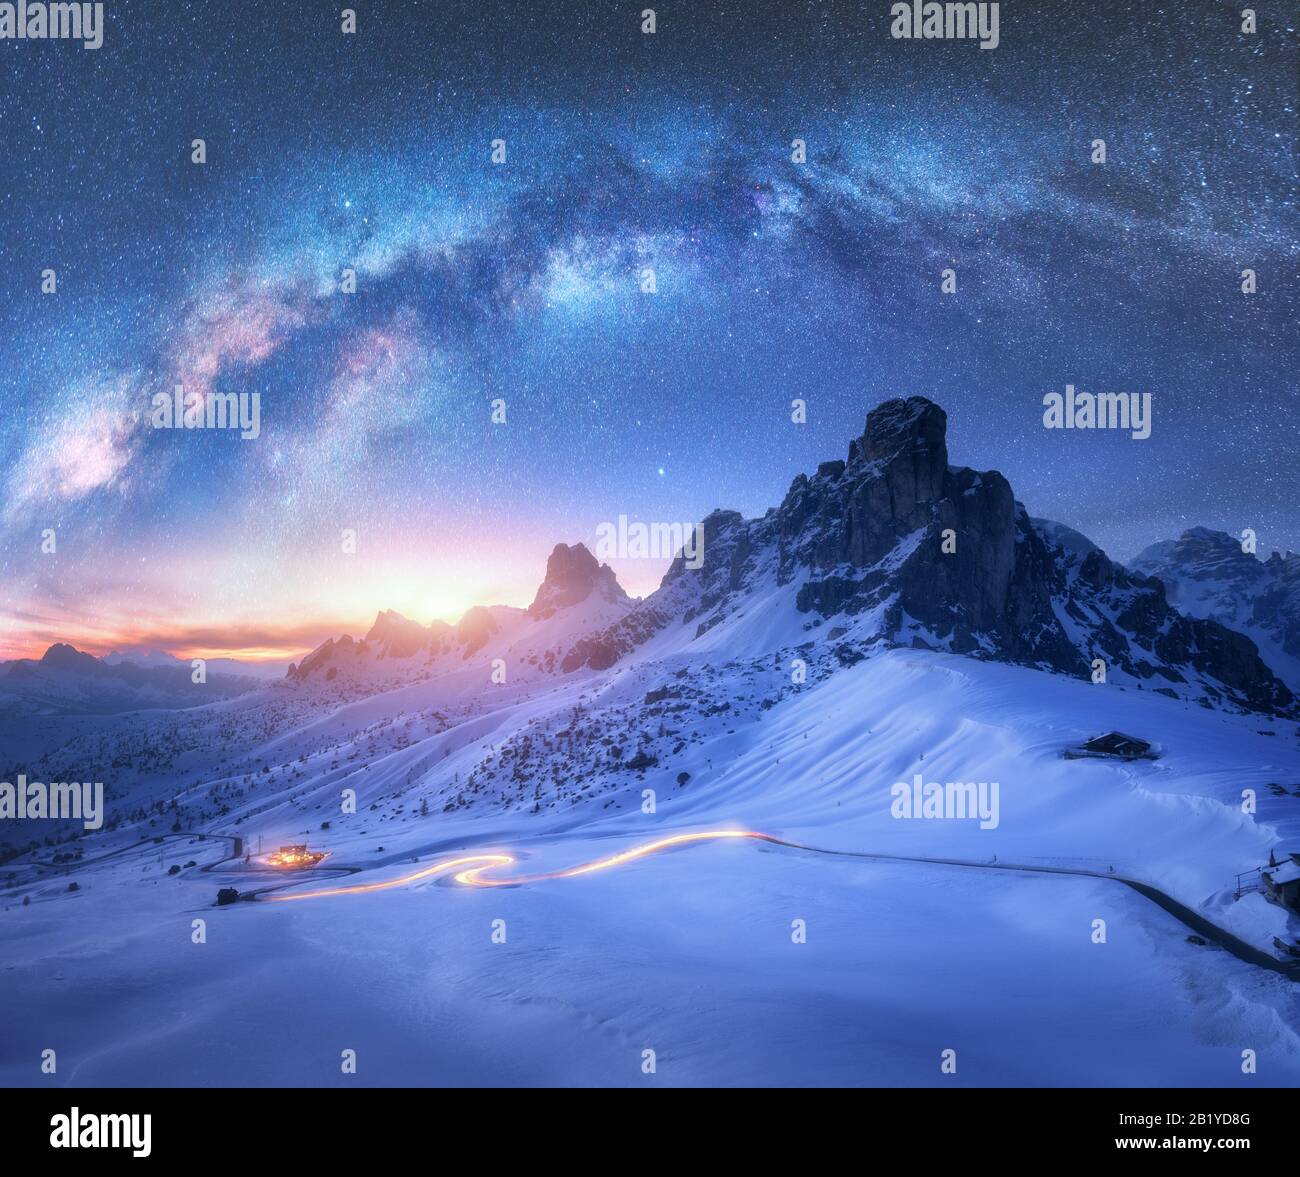 Milky Way over snowy mountains and car headlights on the road Stock Photo